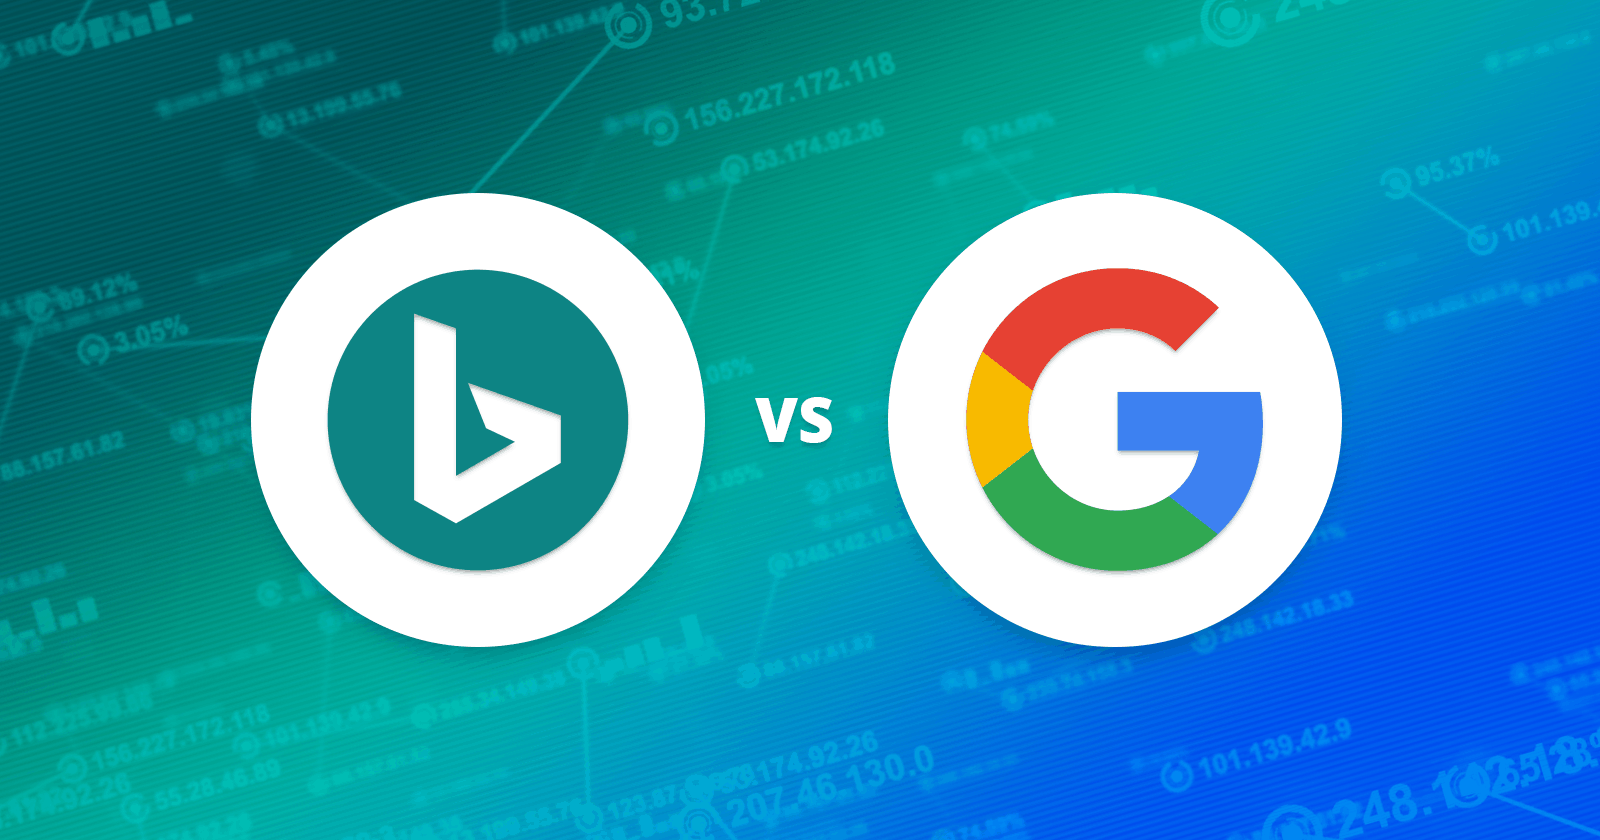 5 Big Ways Bing SEO Differs From Optimizing For Google